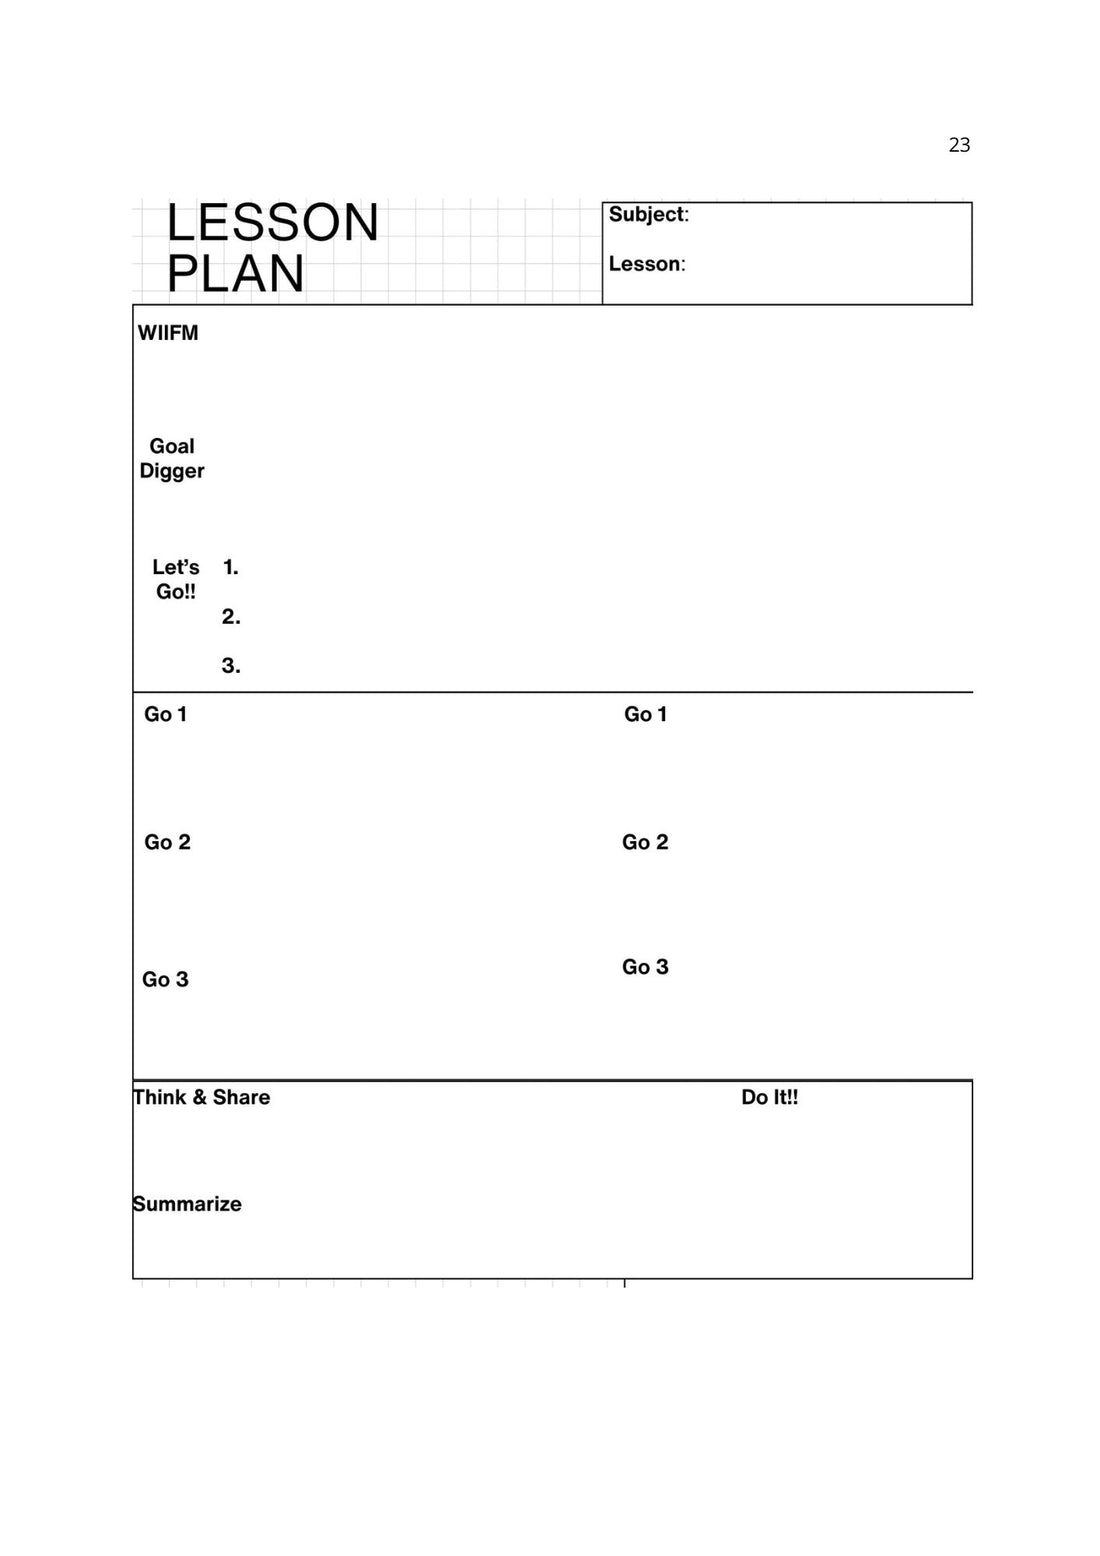 Dynamic Classroom: Blueprint that includes all learners